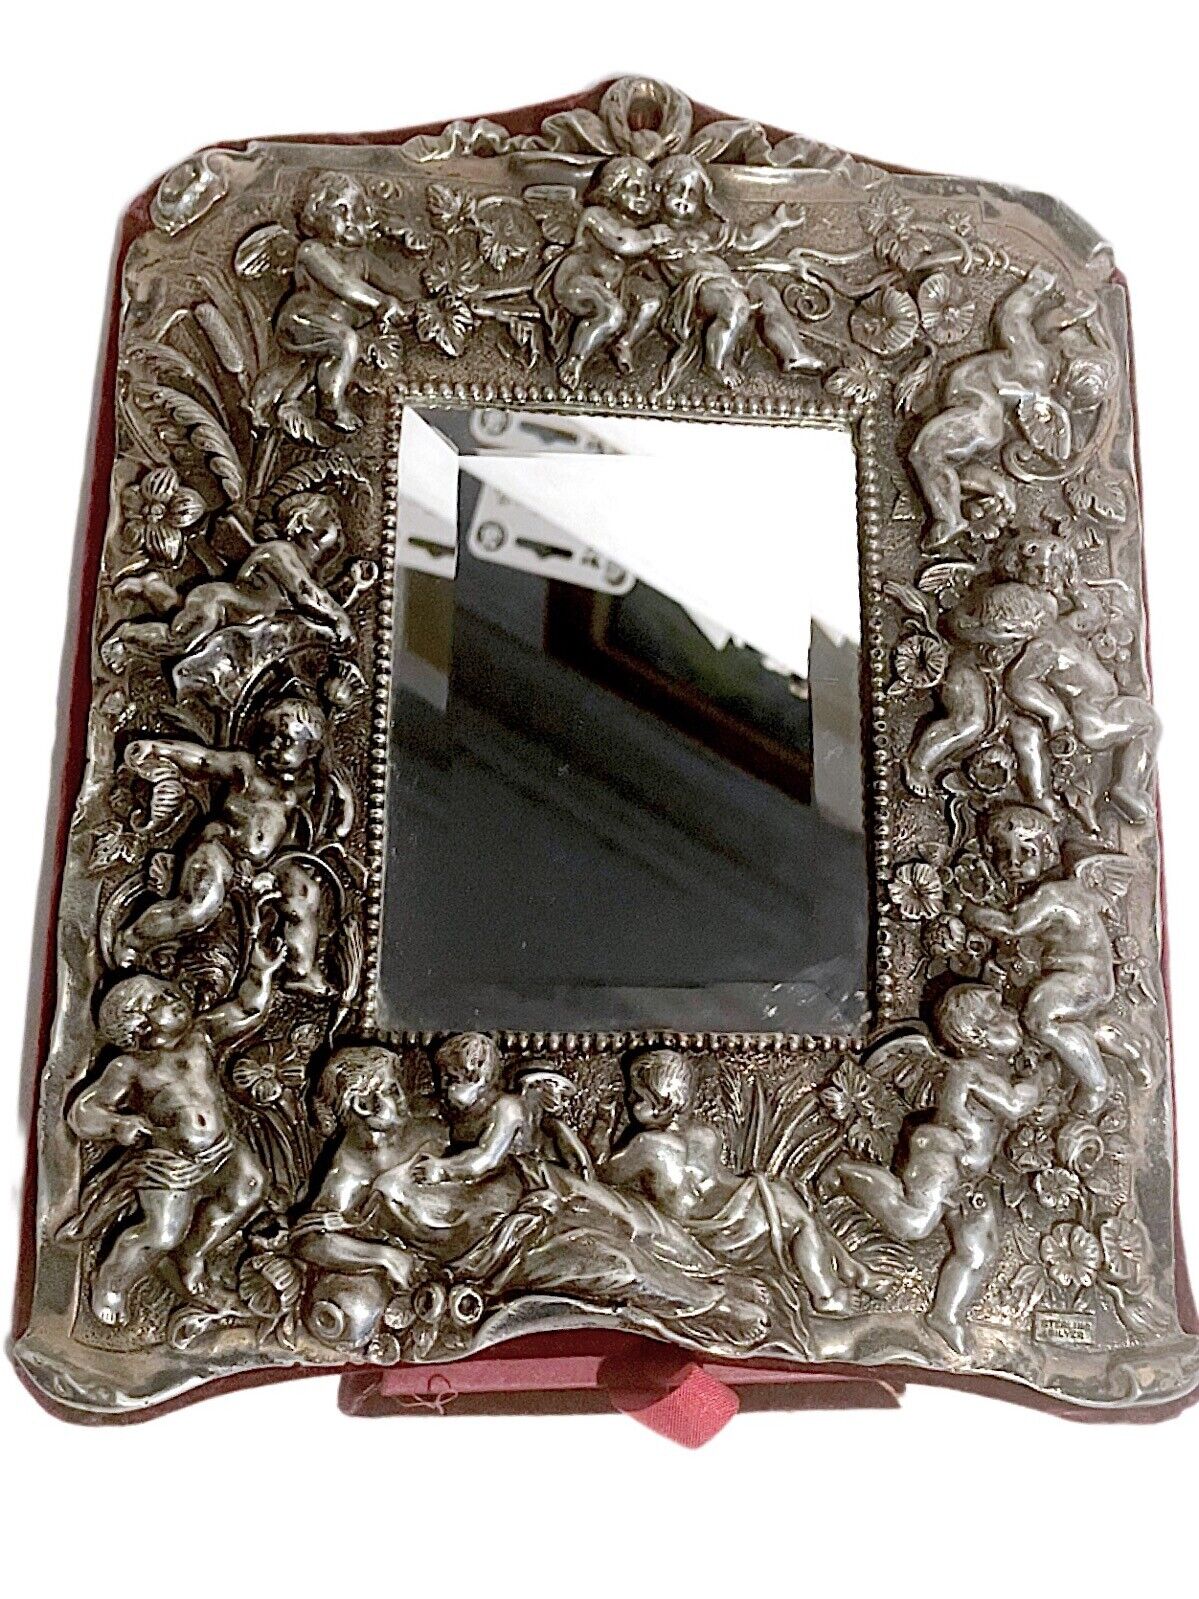 VICTORIAN REPOUSSE STERLING SILVER ORNATE CHRUB & MAIDEN MIRROR w/VELVET STAND